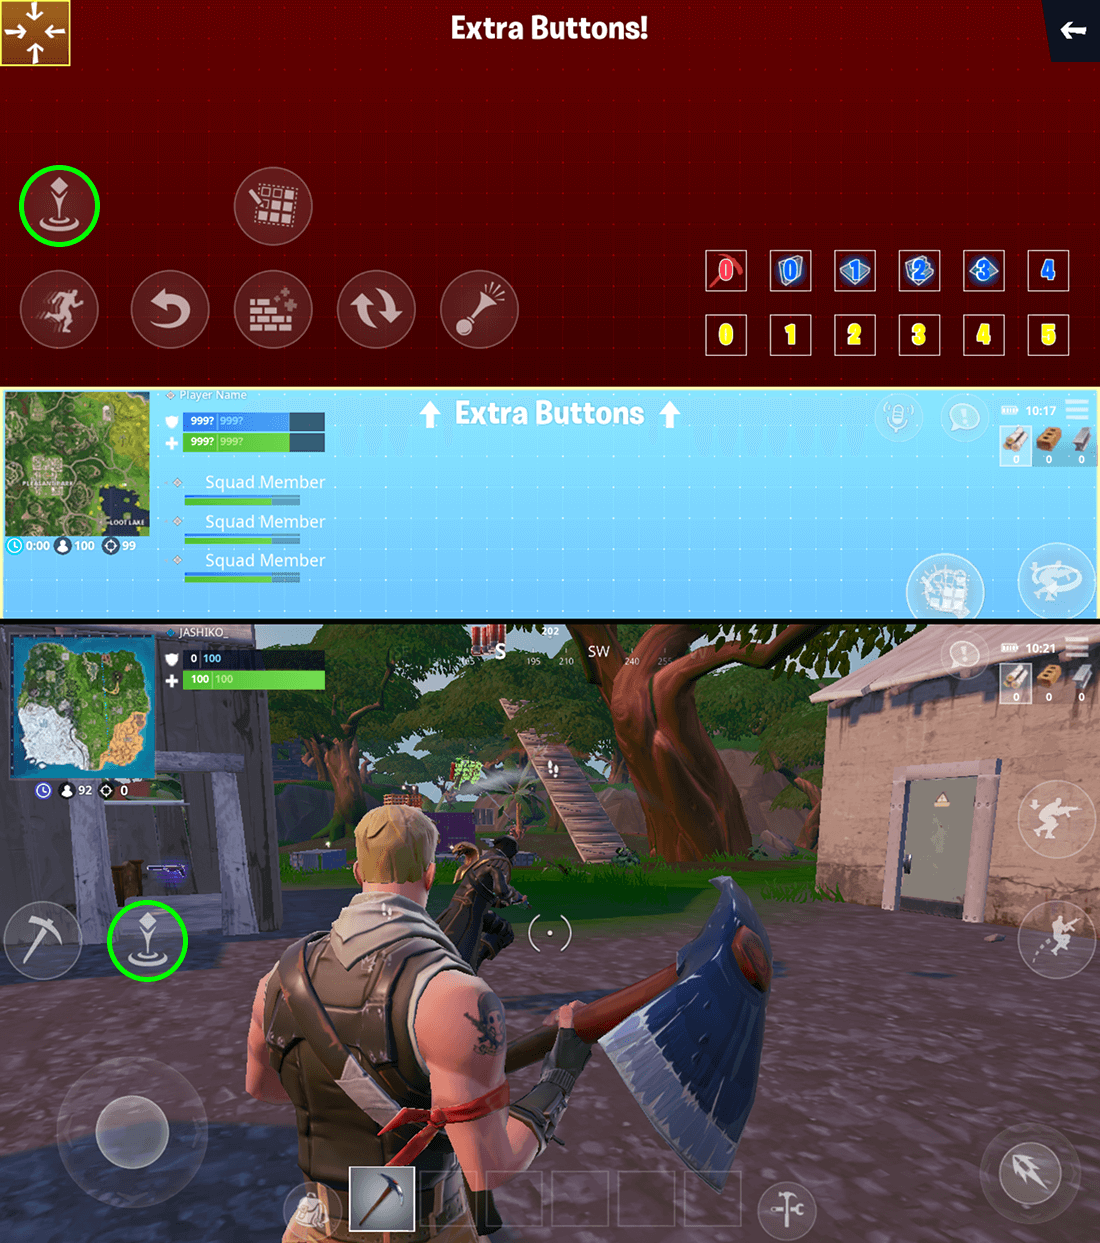 How To Use The Ping Feature On Fortnite Mobile Enable Ping In - how do you use ping on fortnite mobile